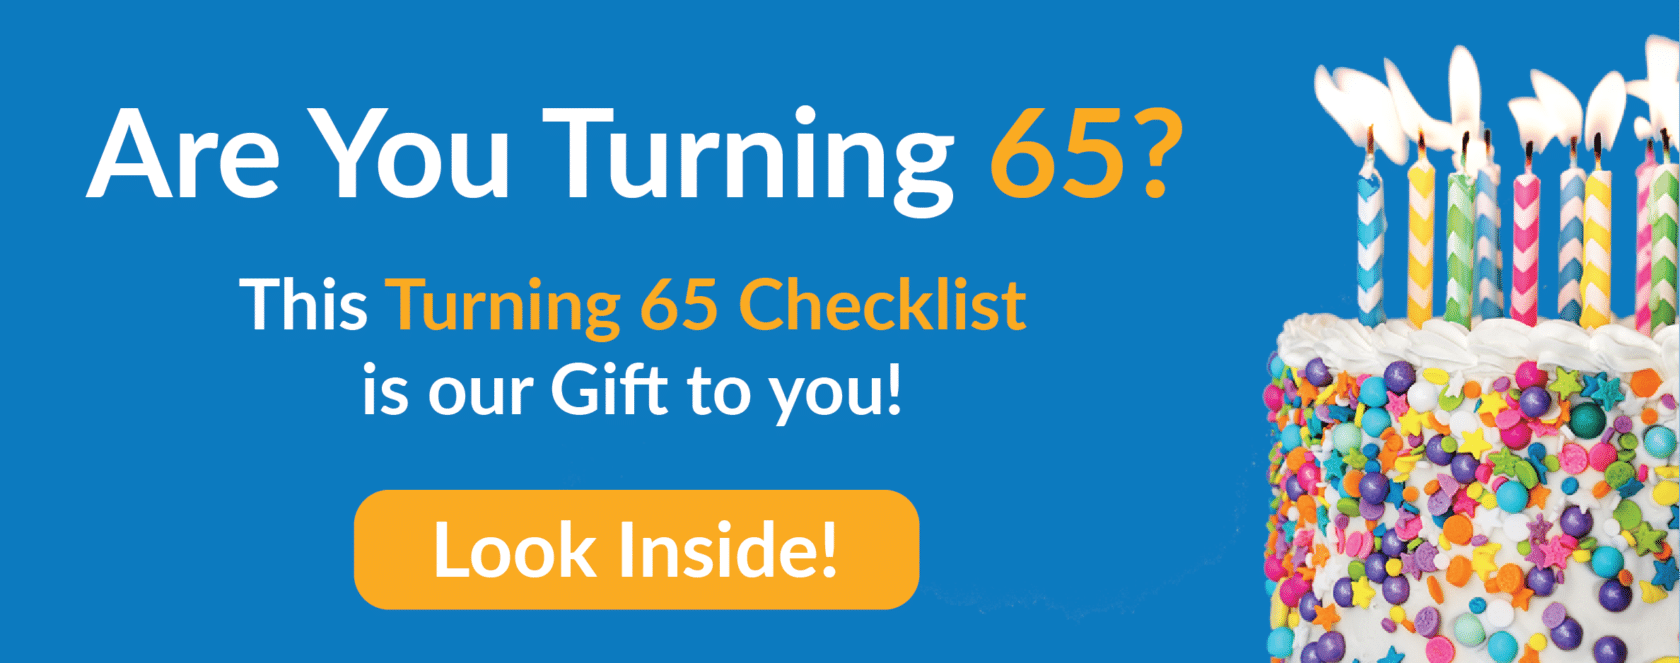 Turning 65 Guide